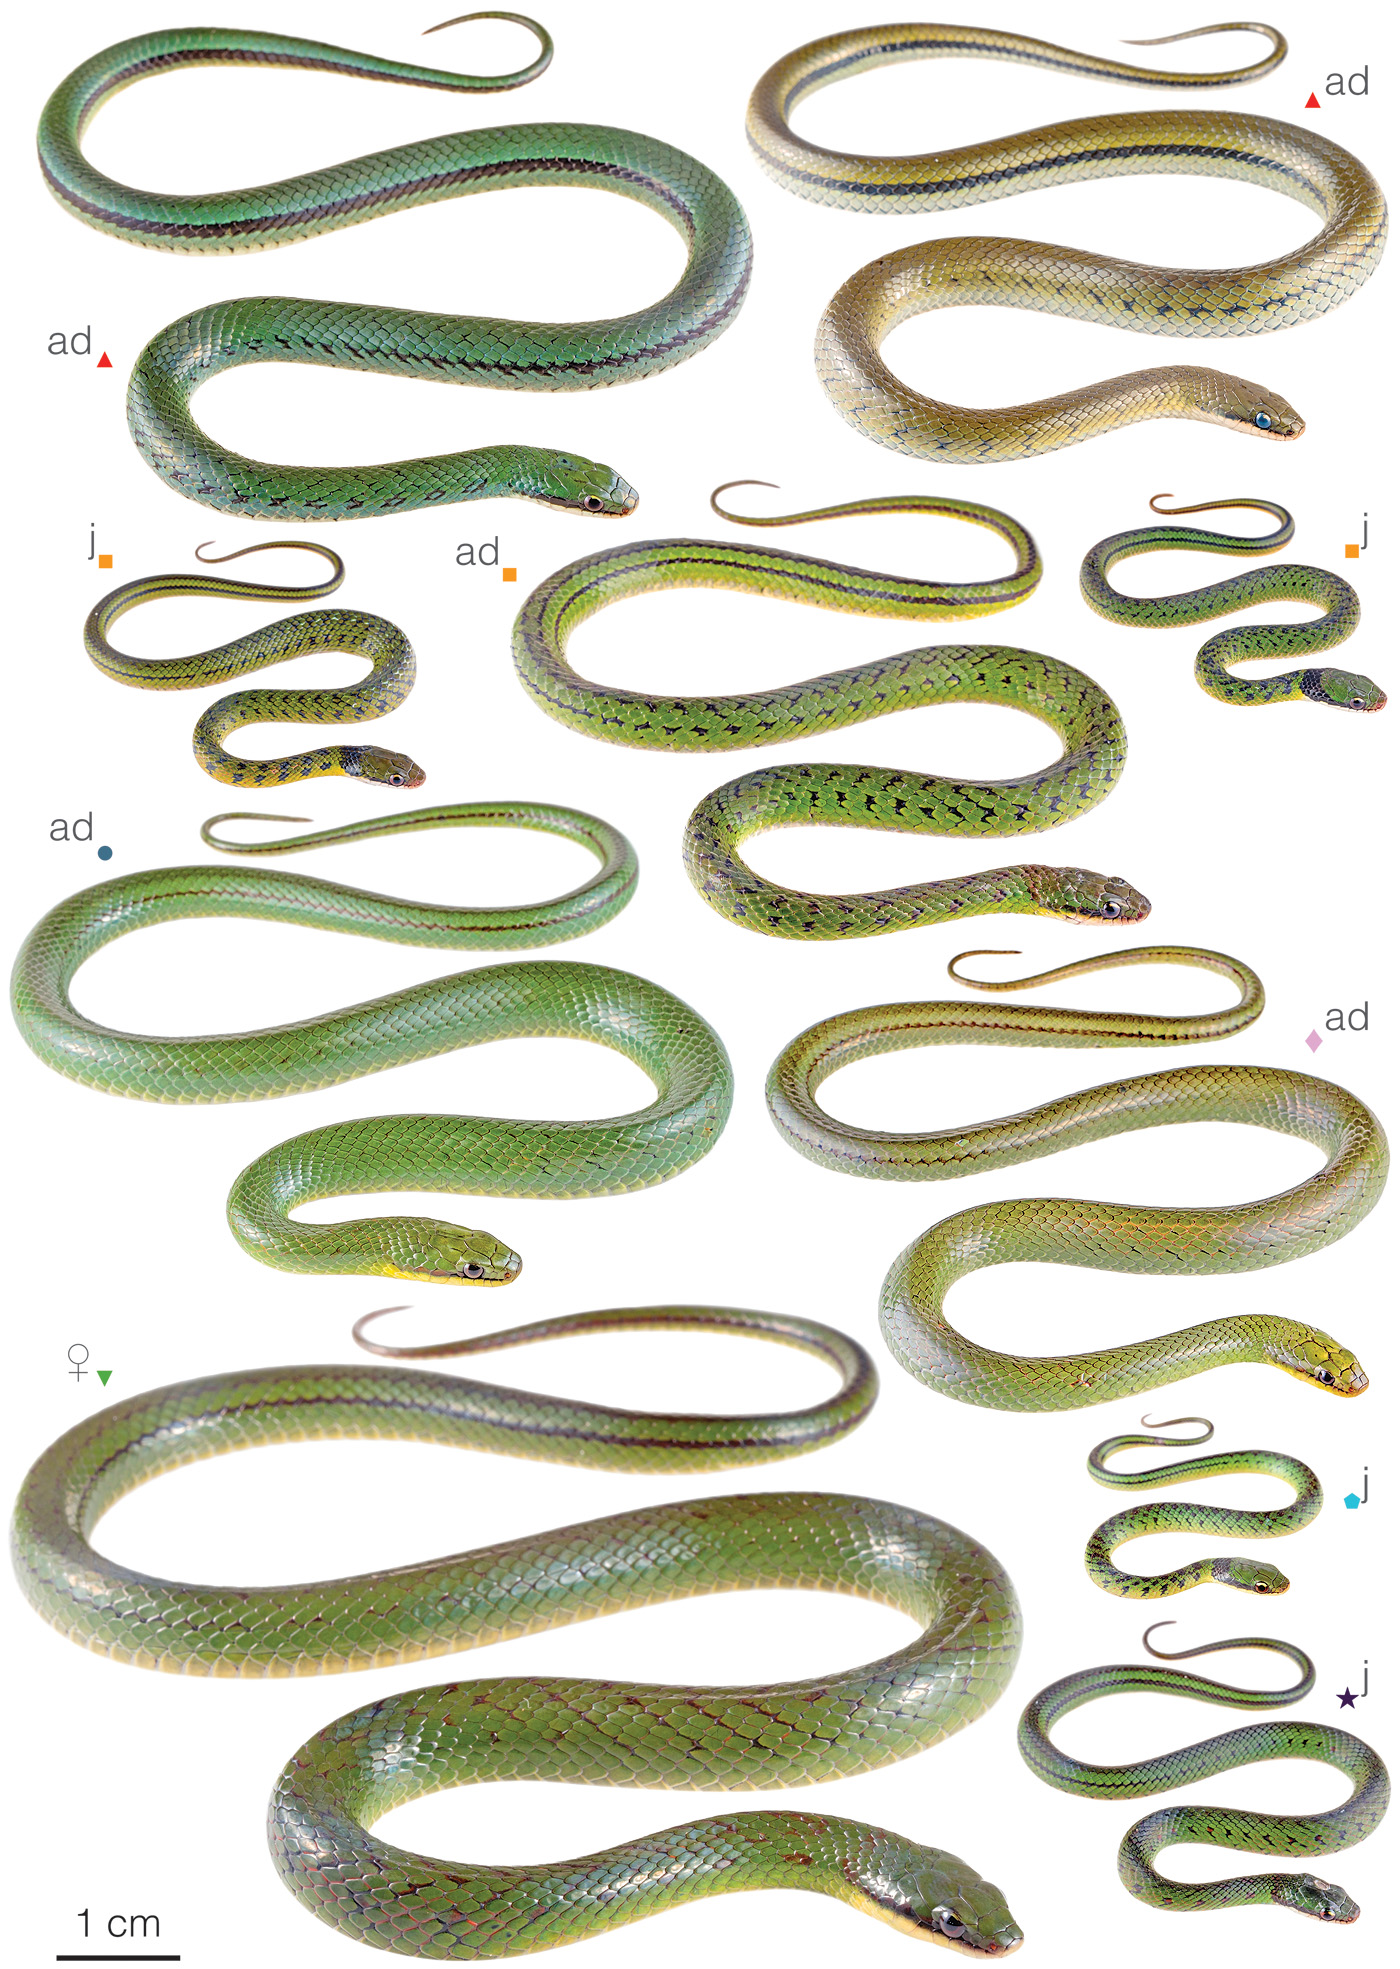 Figure showing variation among individuals of Erythrolamprus albiventris